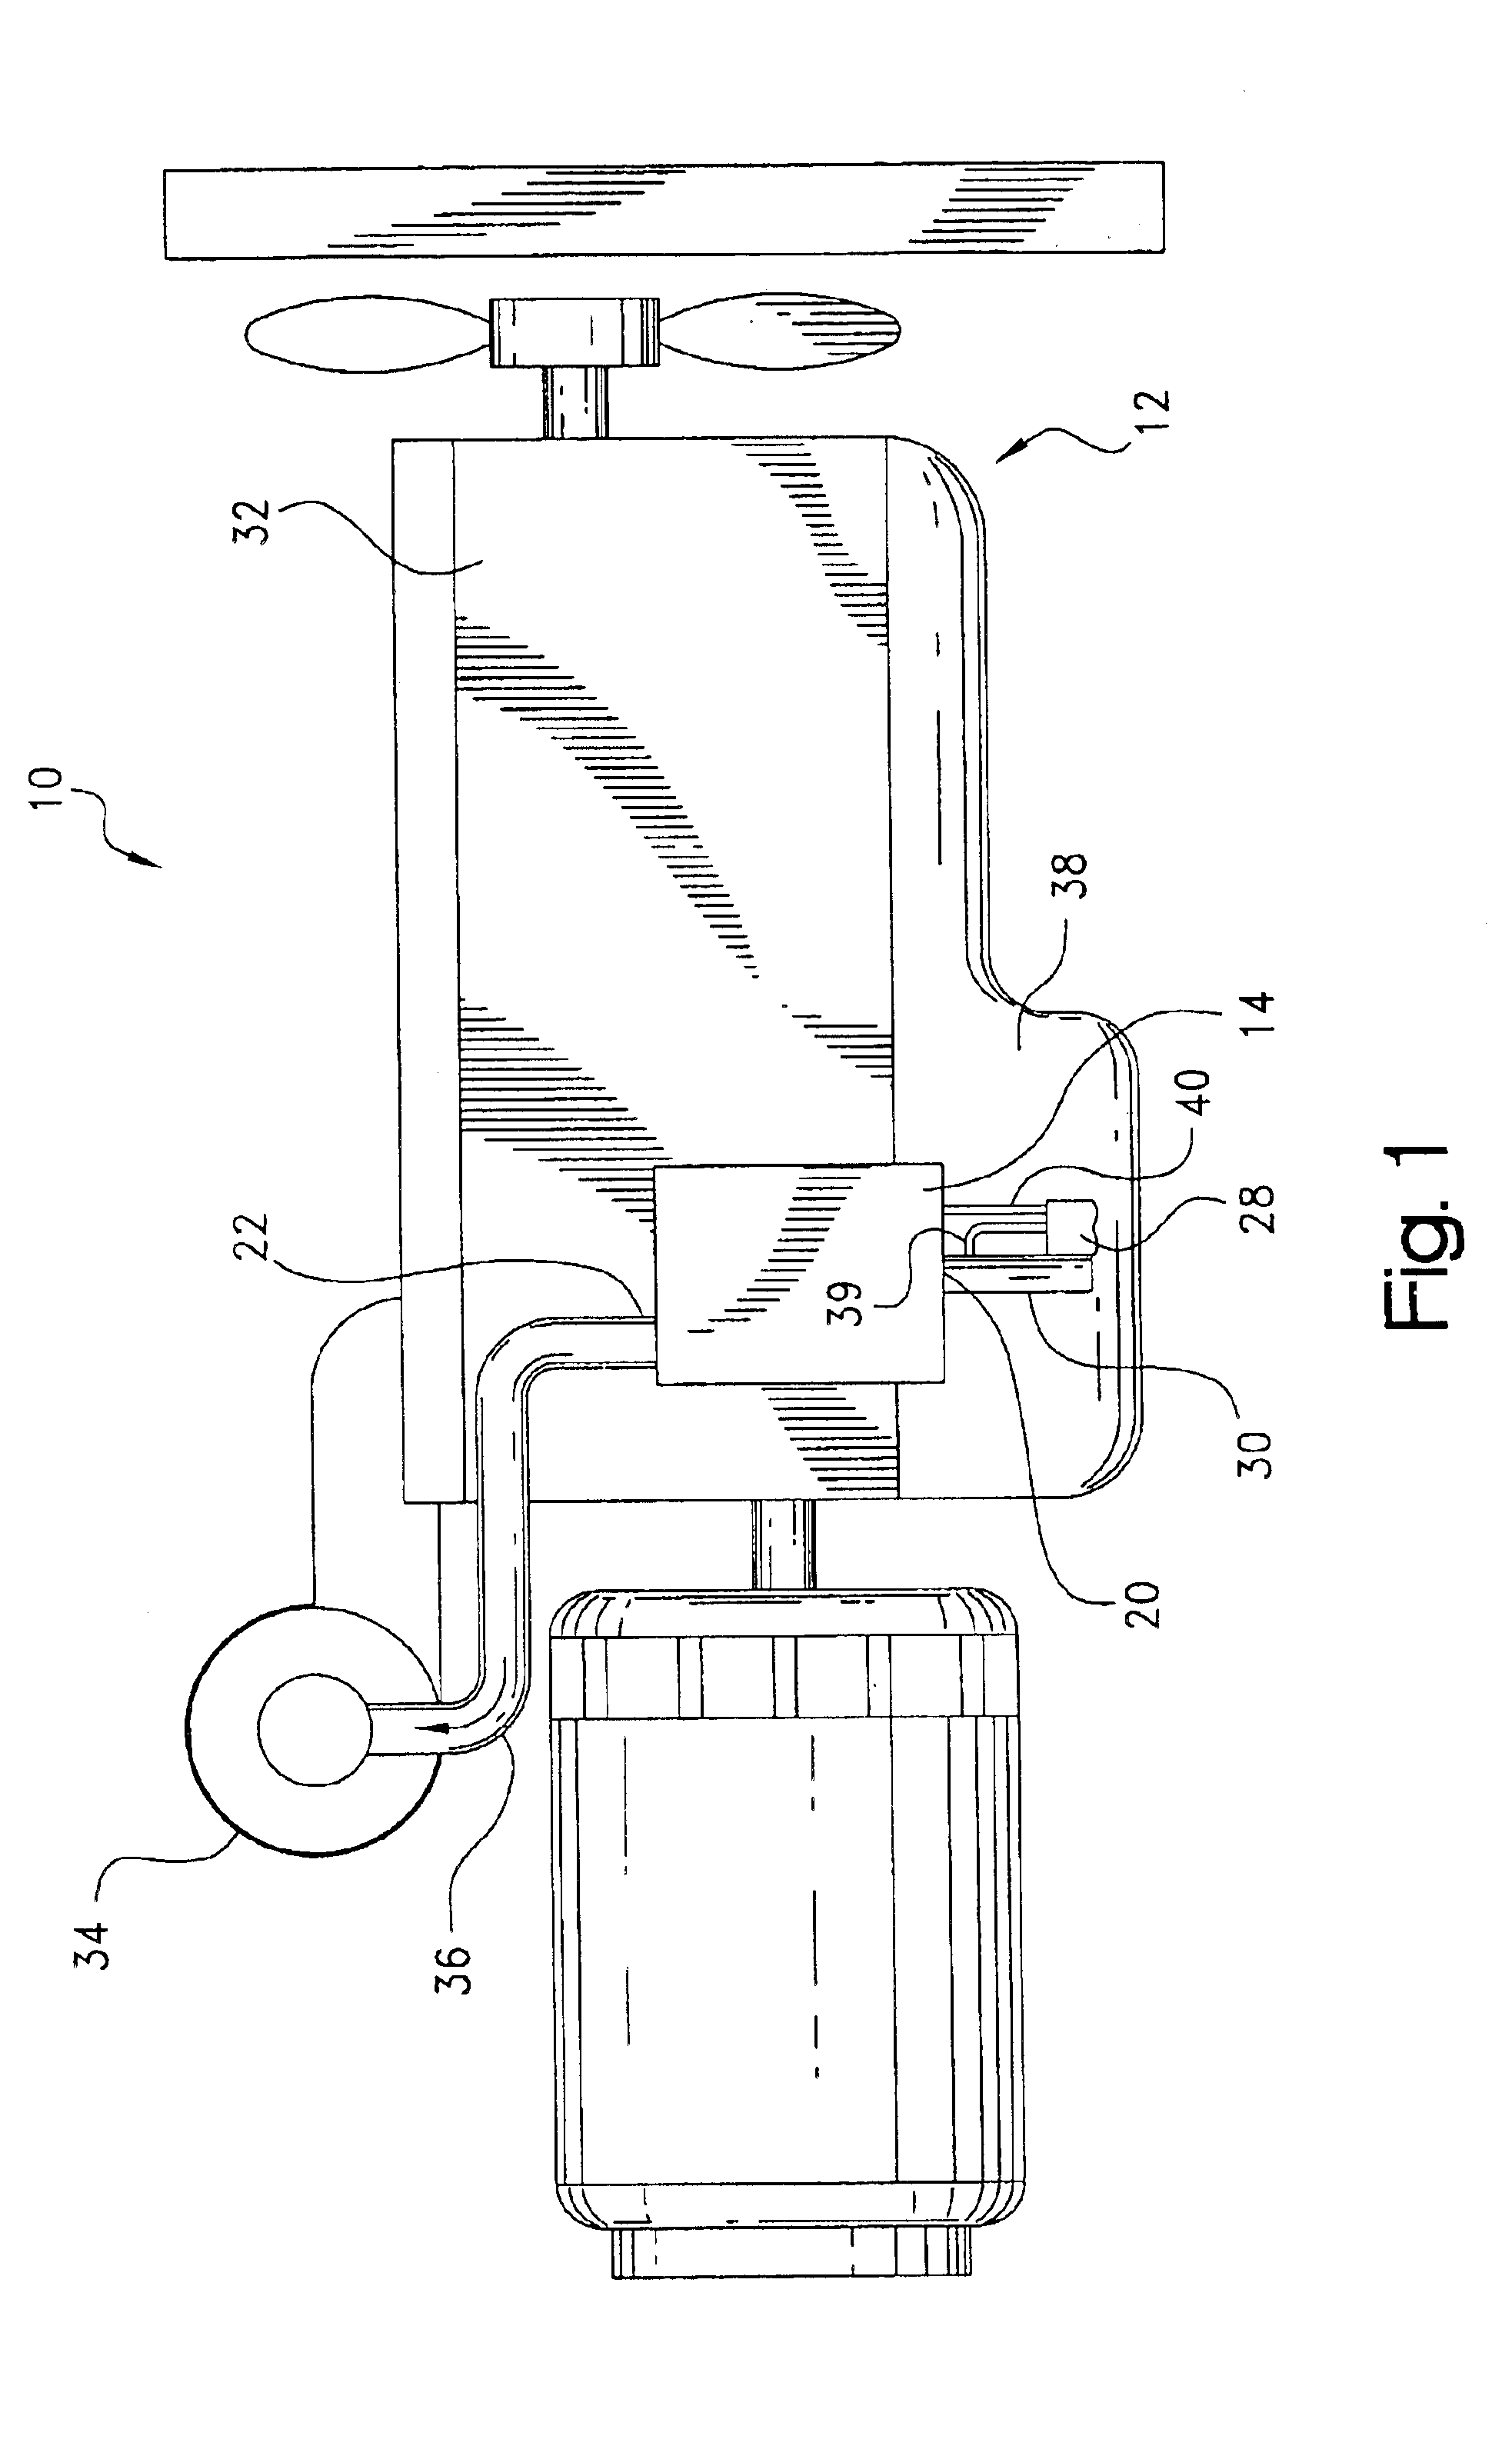 Filter element and assembly with continuous drain